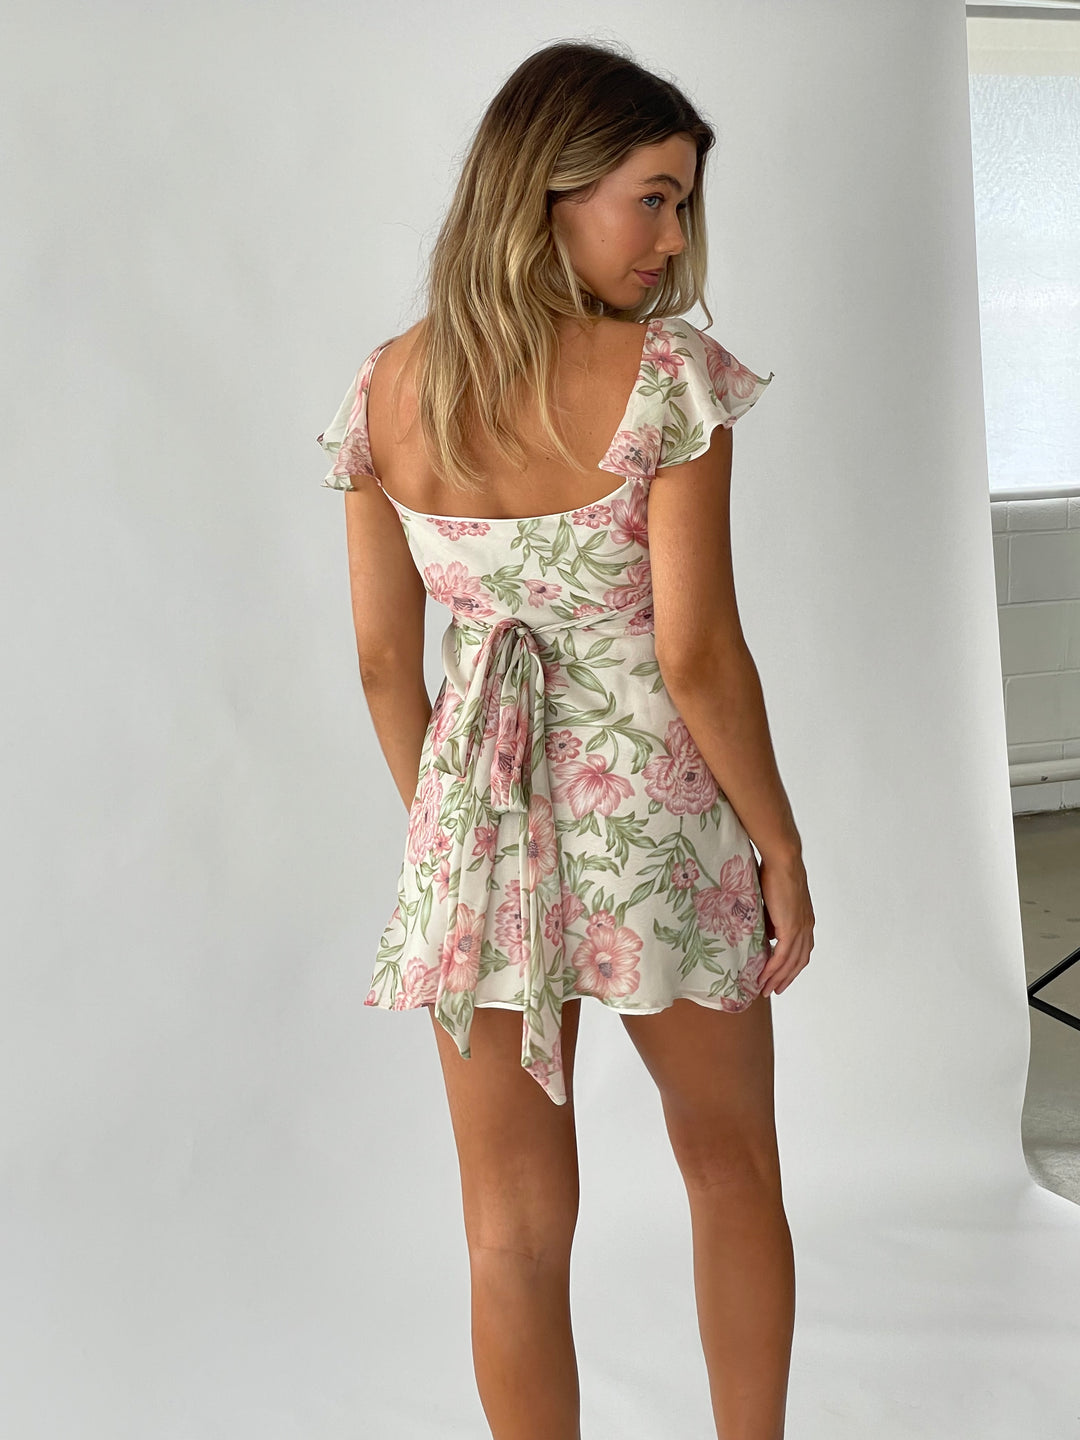 Floral silk mini dress back- vintage inspired floral print. Dress is lined in a silk and features a tie up back to pull in all the right areas. 